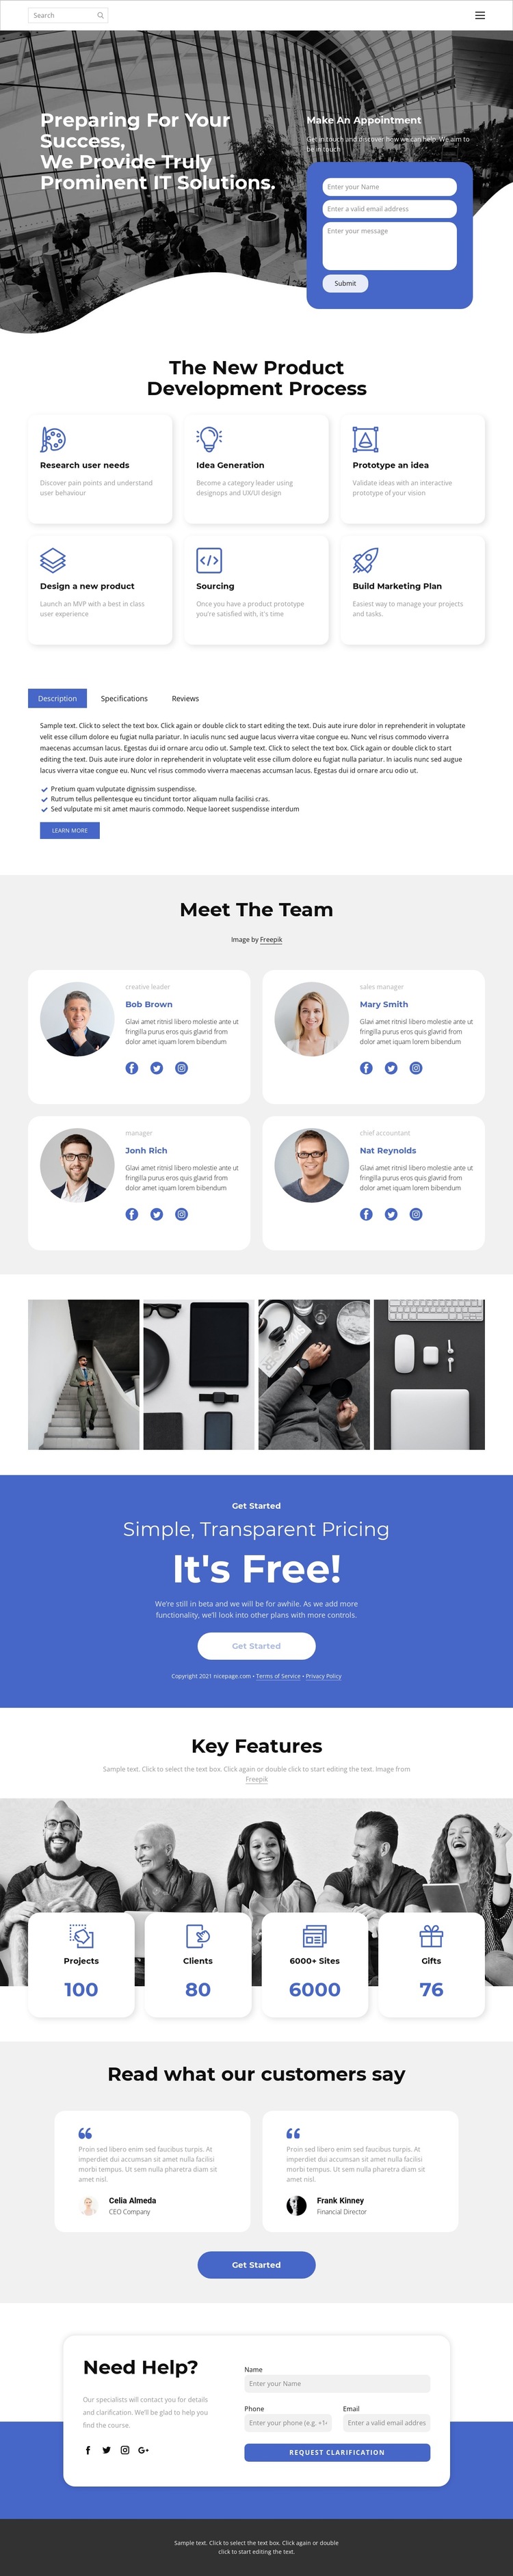 Quick help in problems HTML5 Template